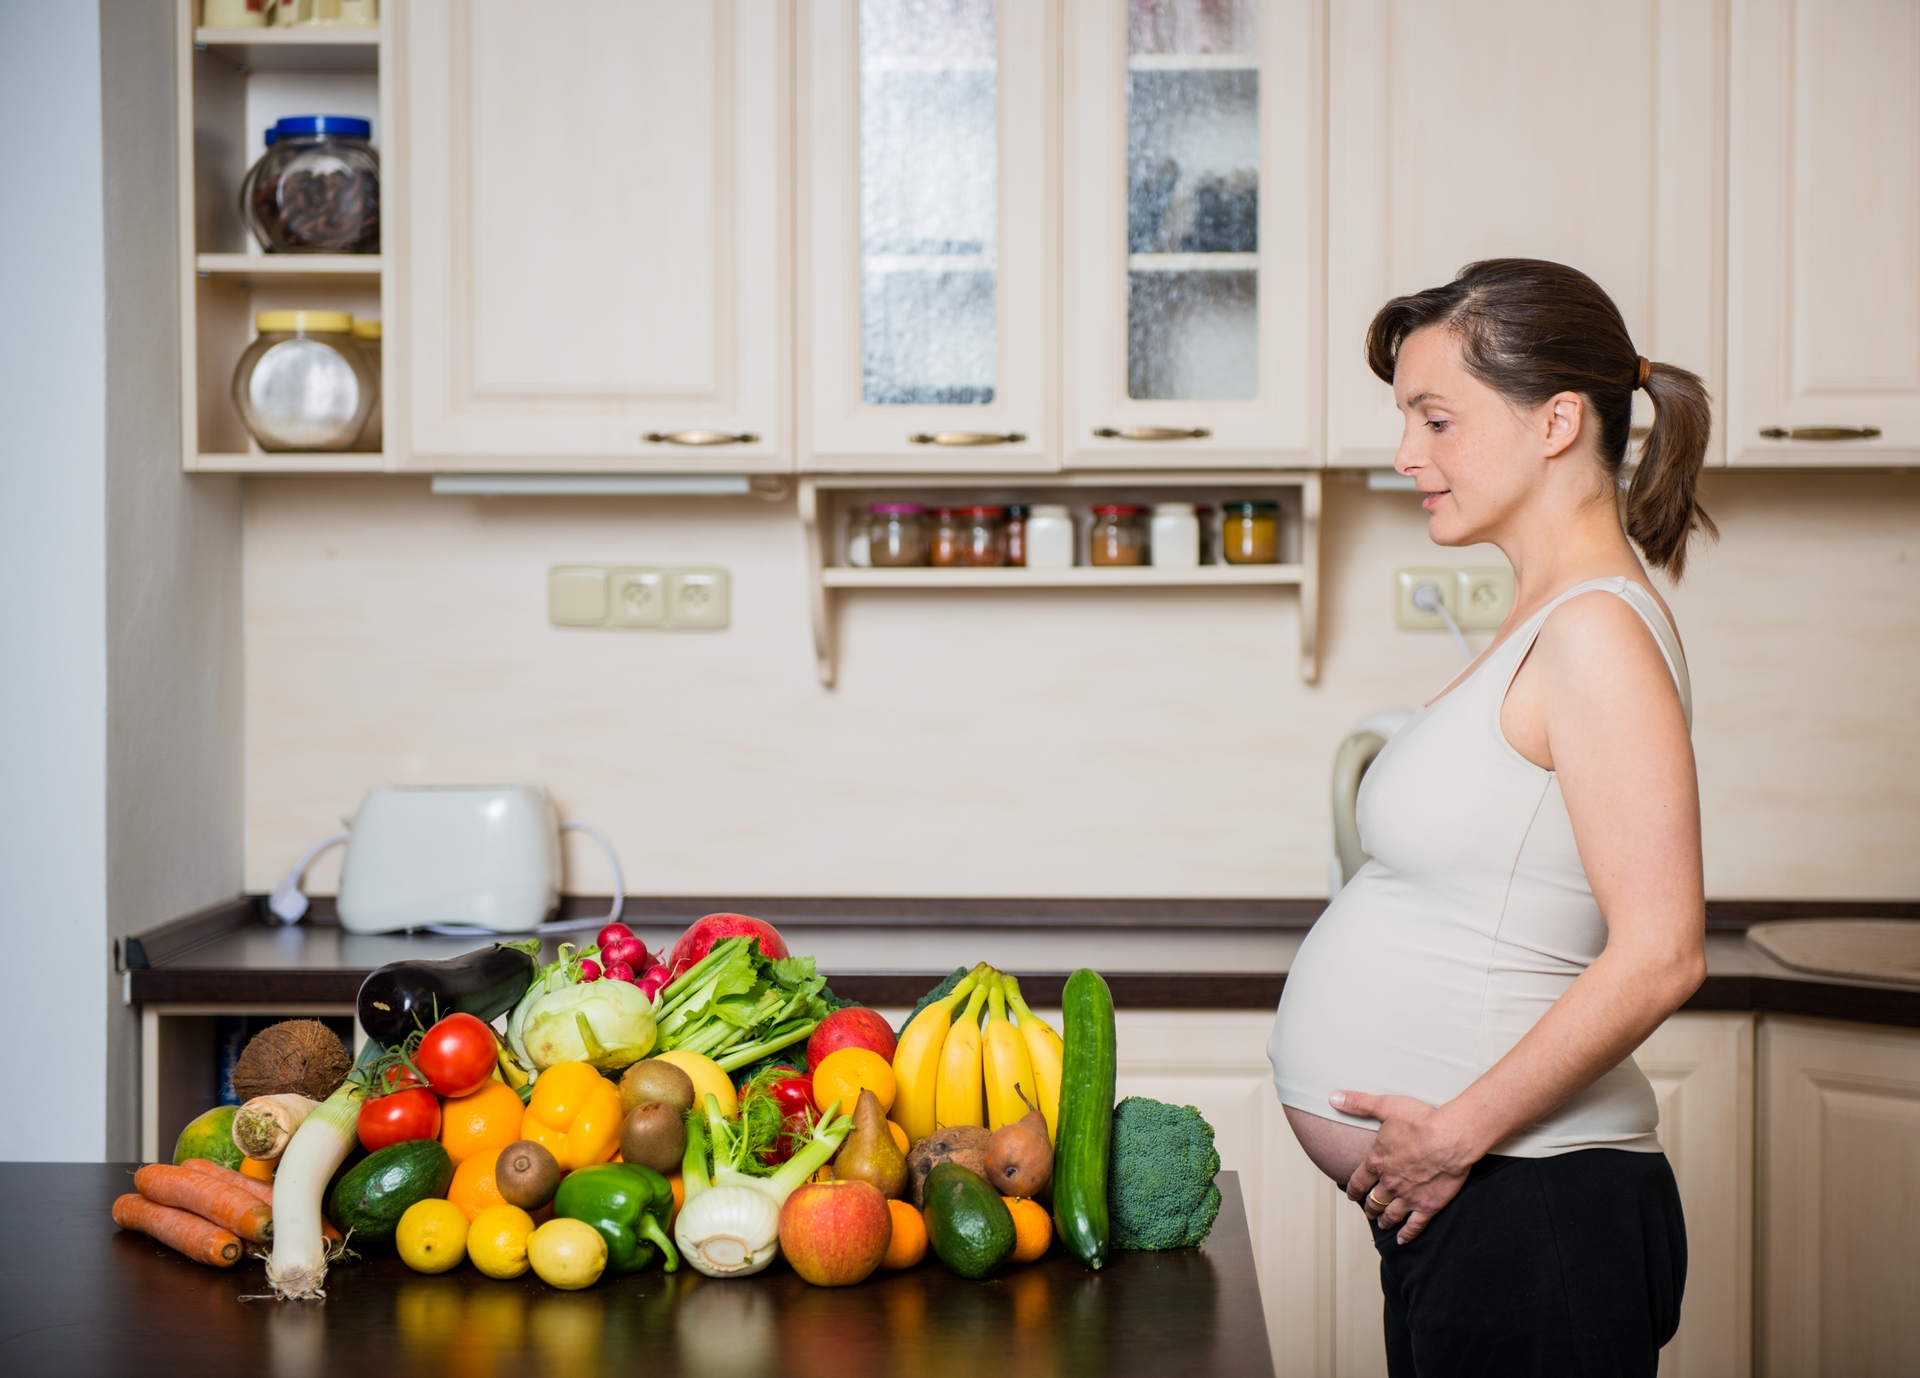 What to eat to conceive: Top 5 foods to eat before getting pregnant